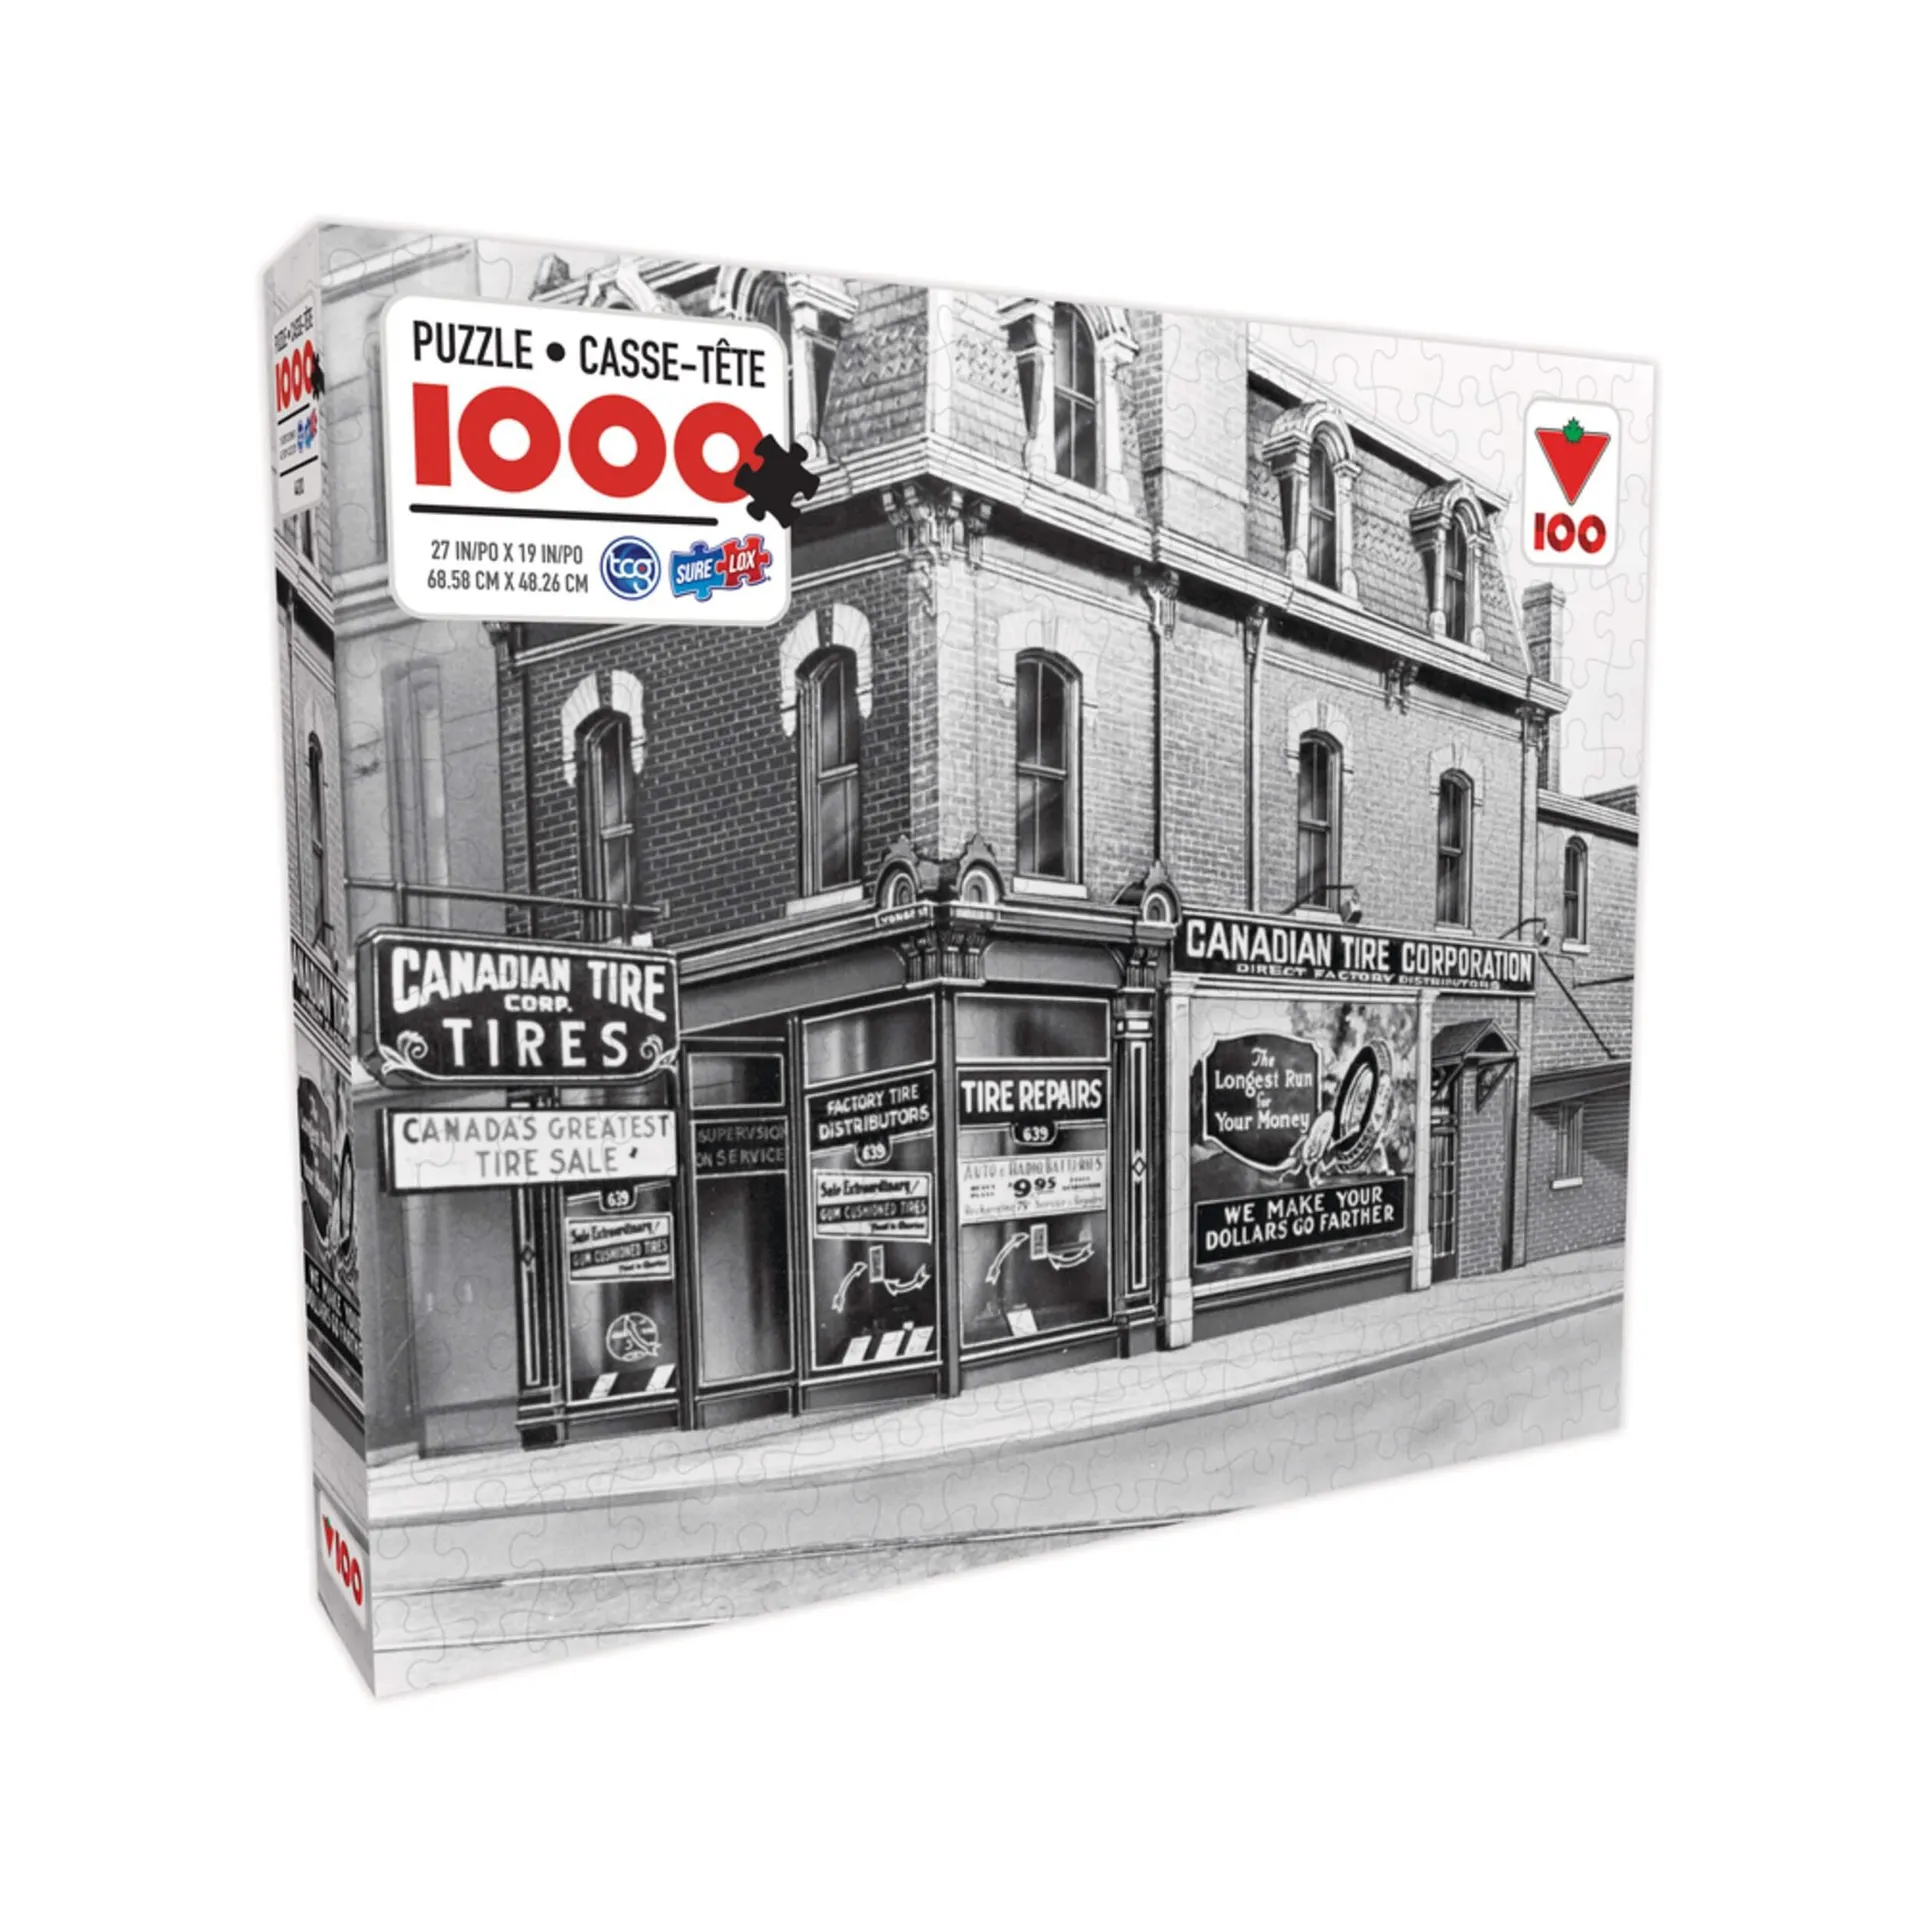 Canadian Tire 100th Anniversary Vintage Puzzle, 1000-pc